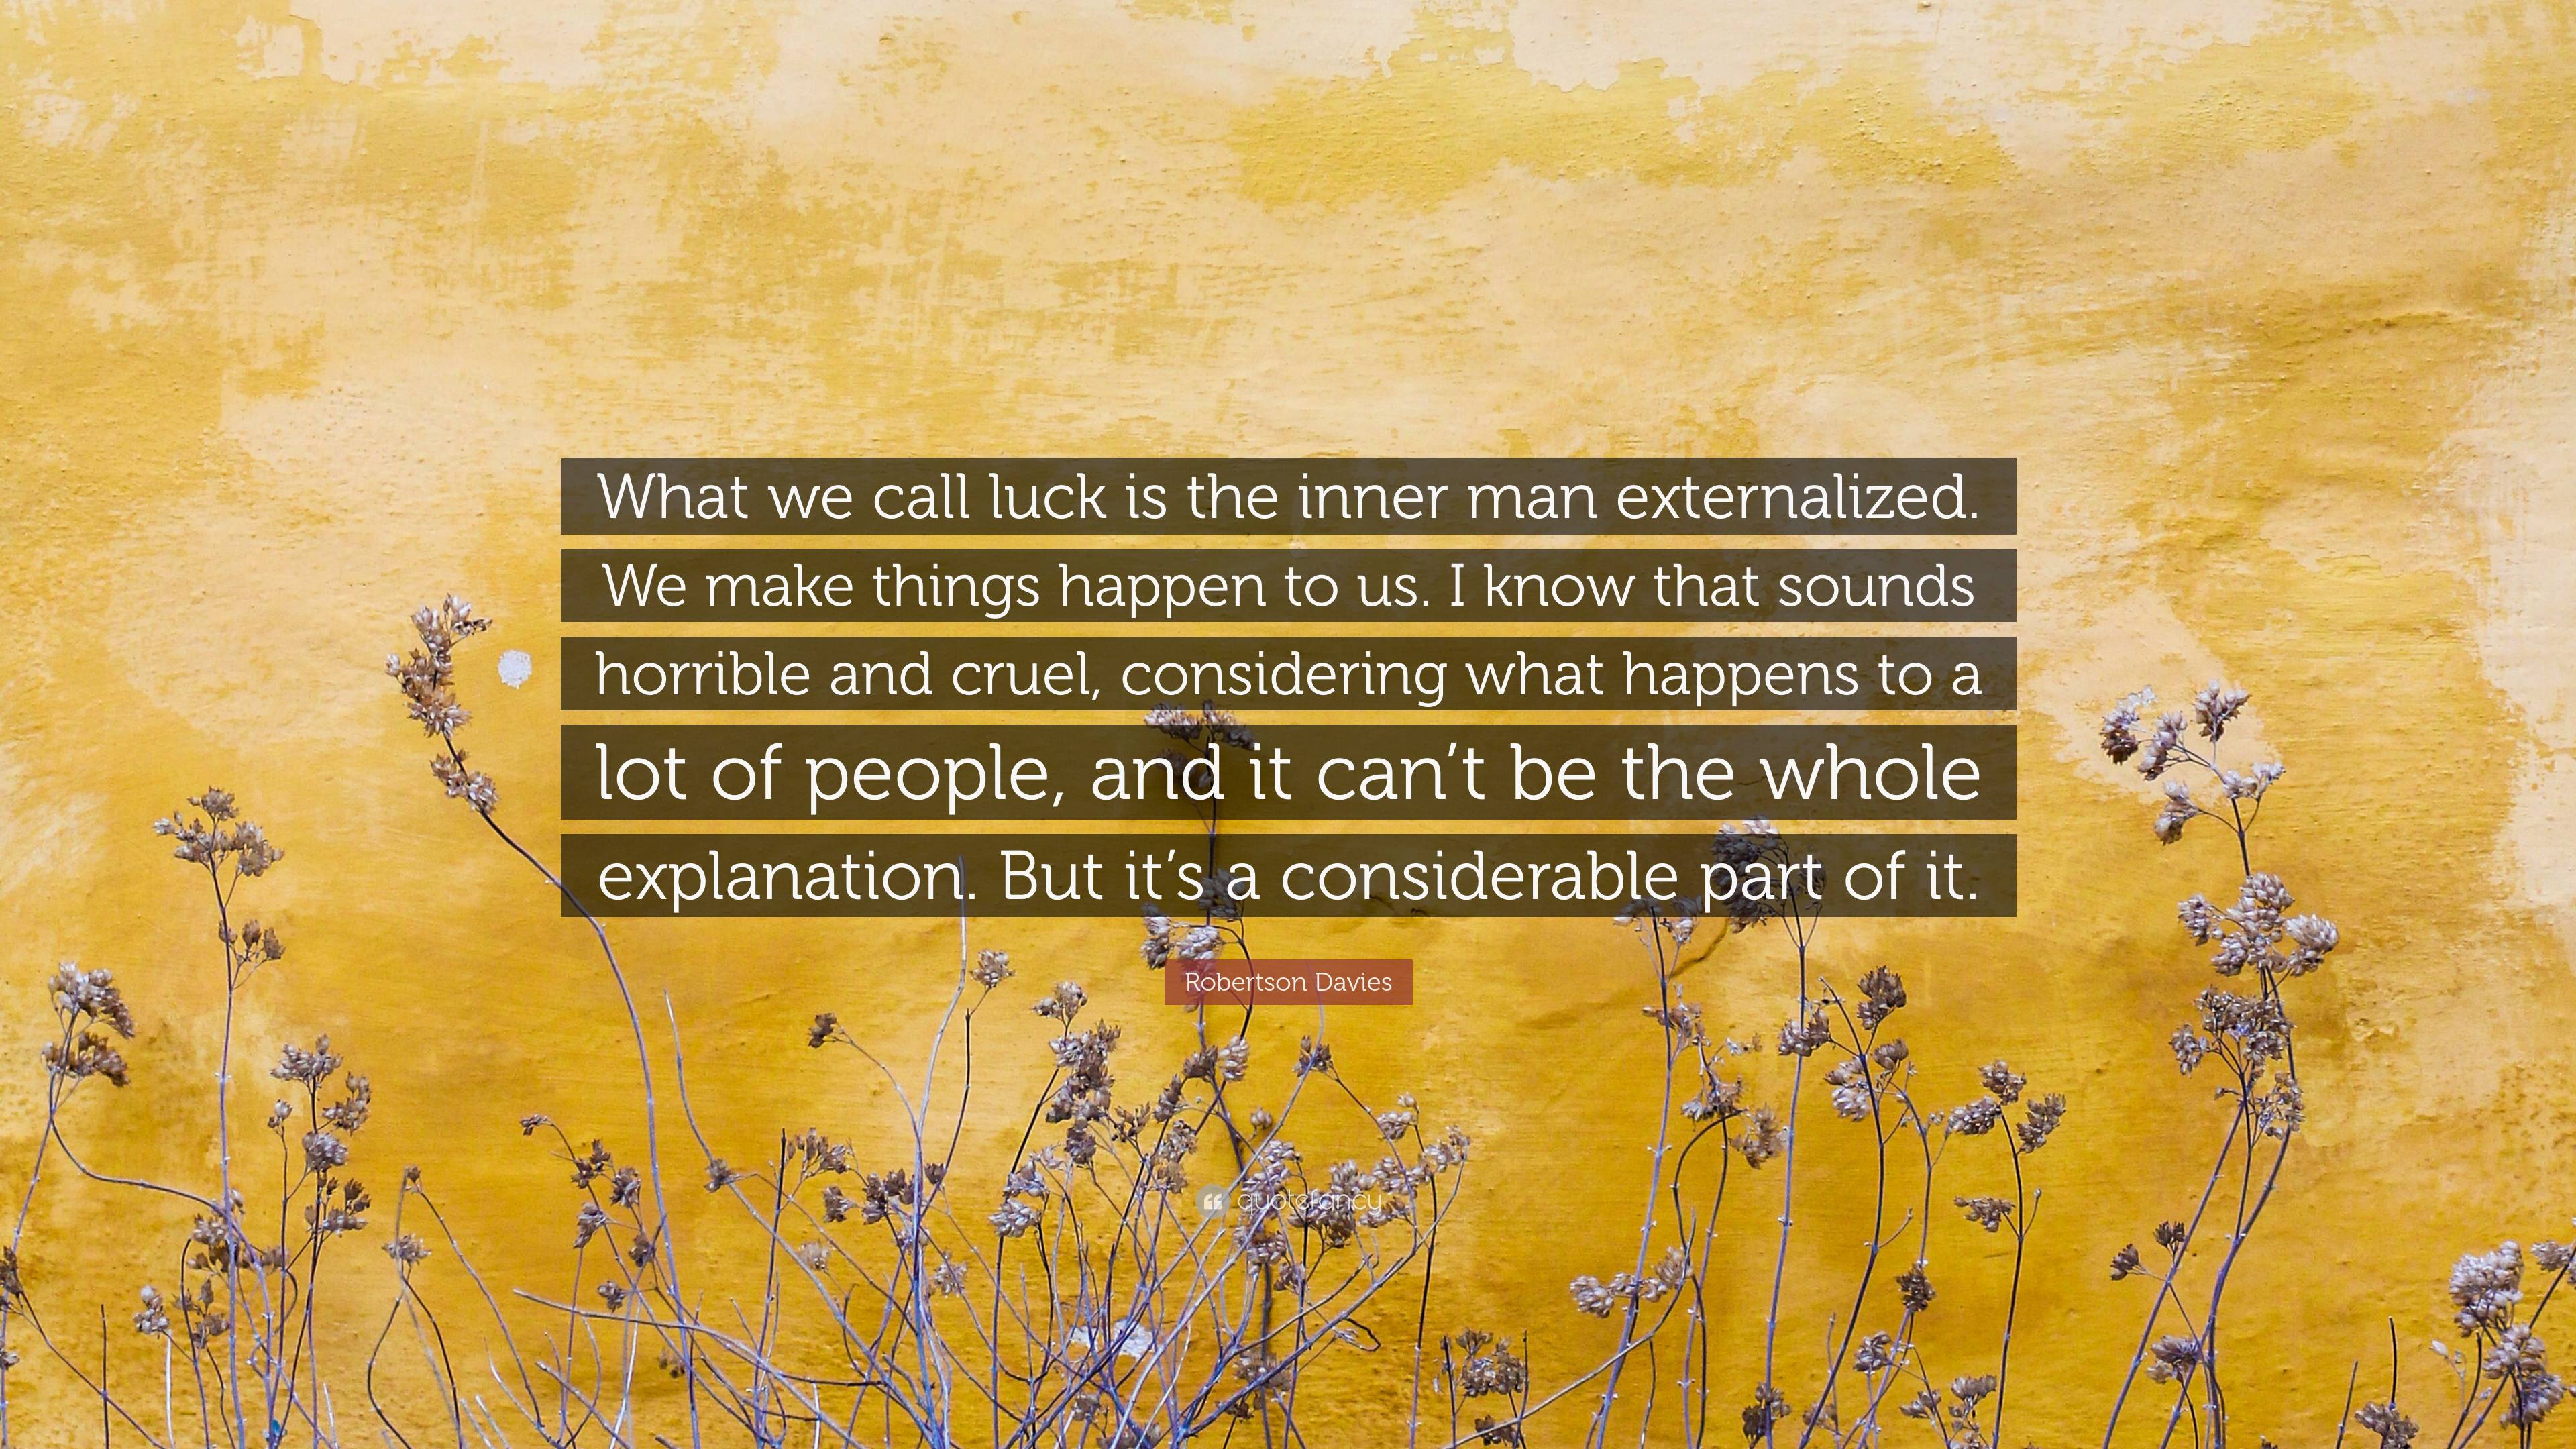 Robertson Davies Quote: “What we call luck is the inner man ...